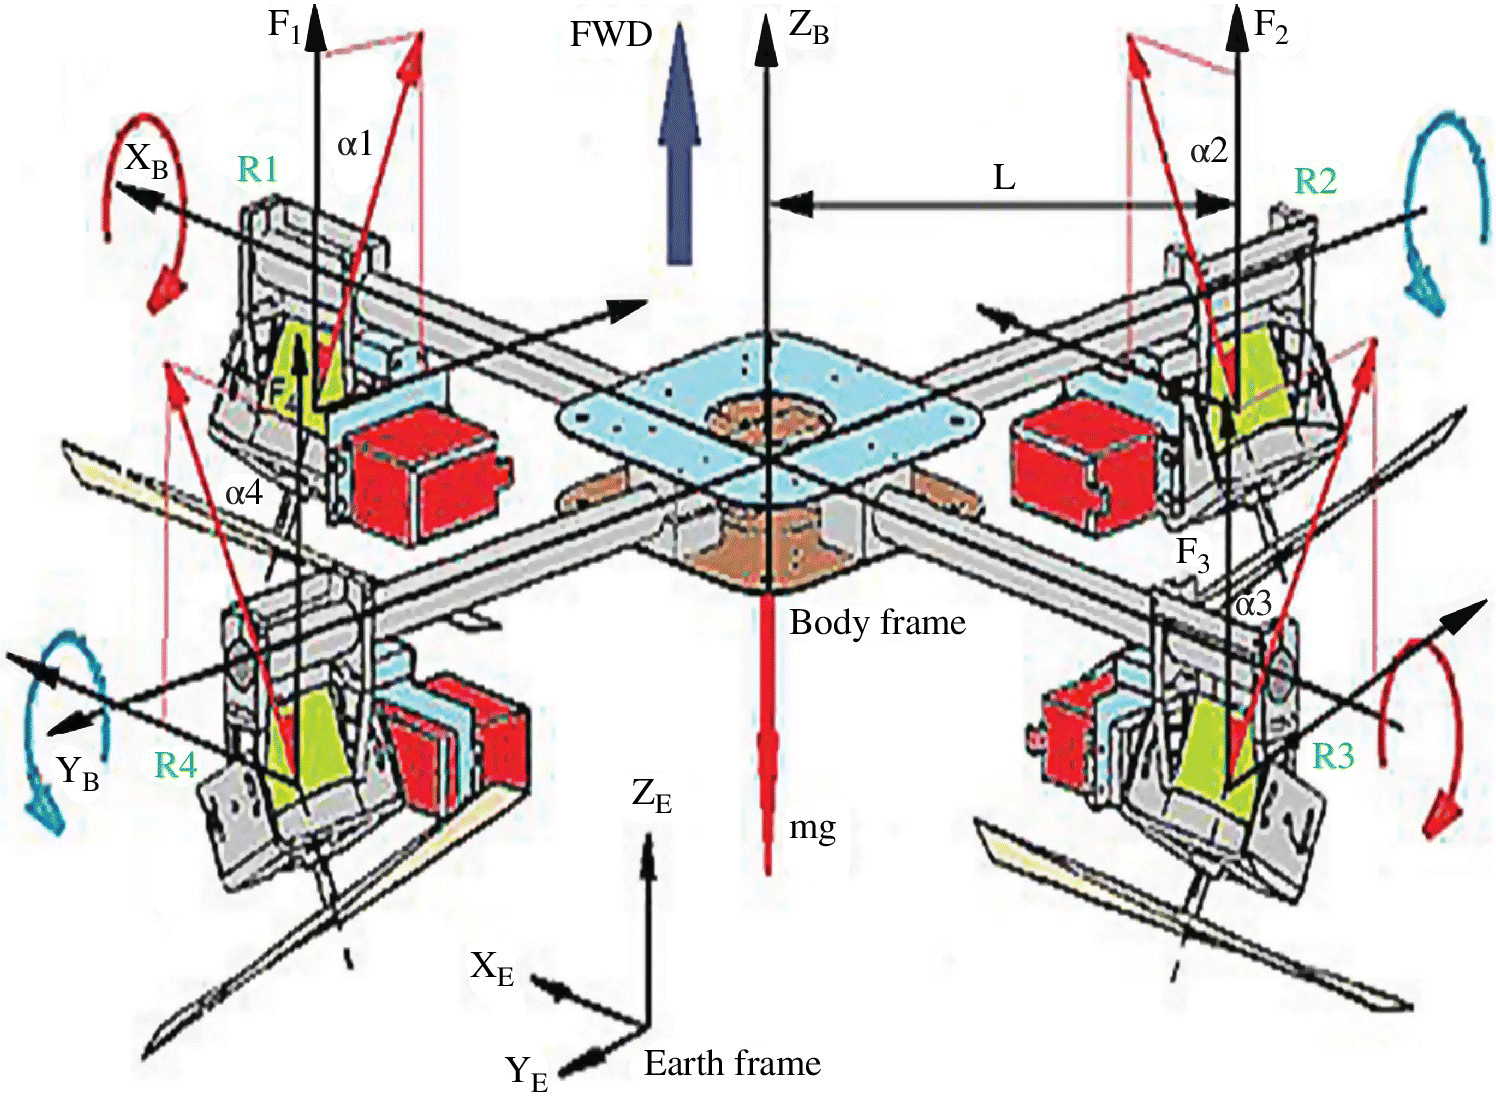 Schematic of quad‐tilt‐rotor illustrating the arrangement of forces and torques with arrows labeled F1, F2, FWD, ZB, YB, body frame, mg, etc.